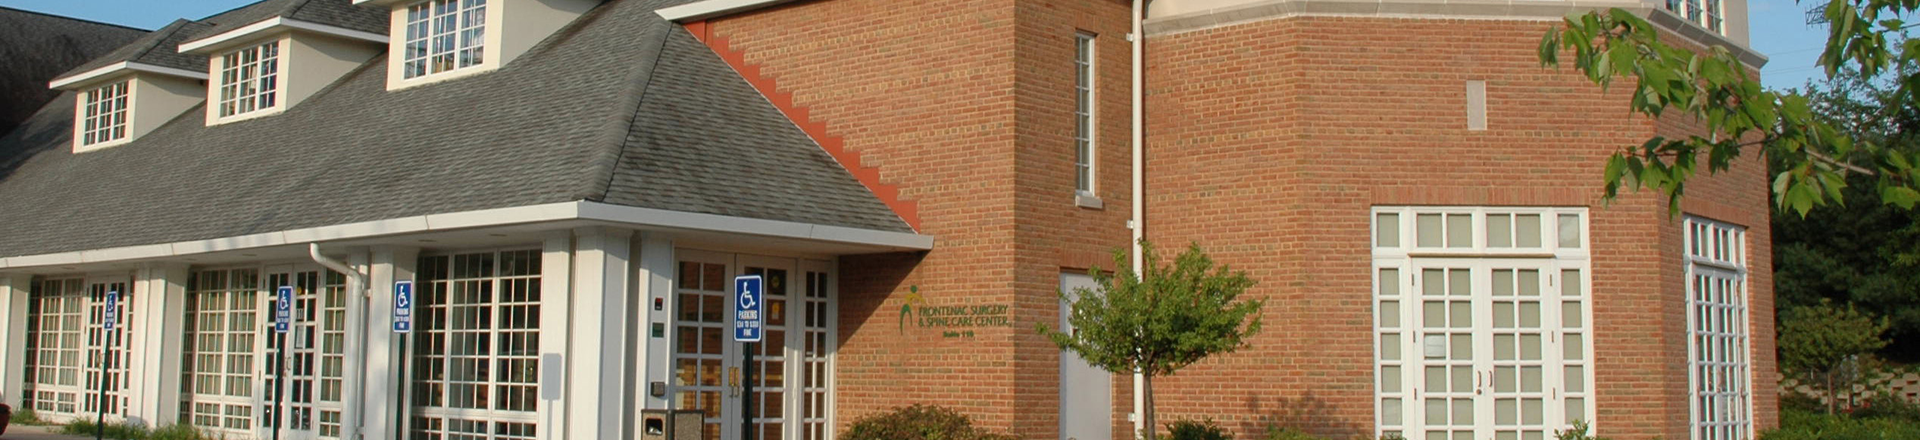 Frontenac Surgery and Spine Care Center